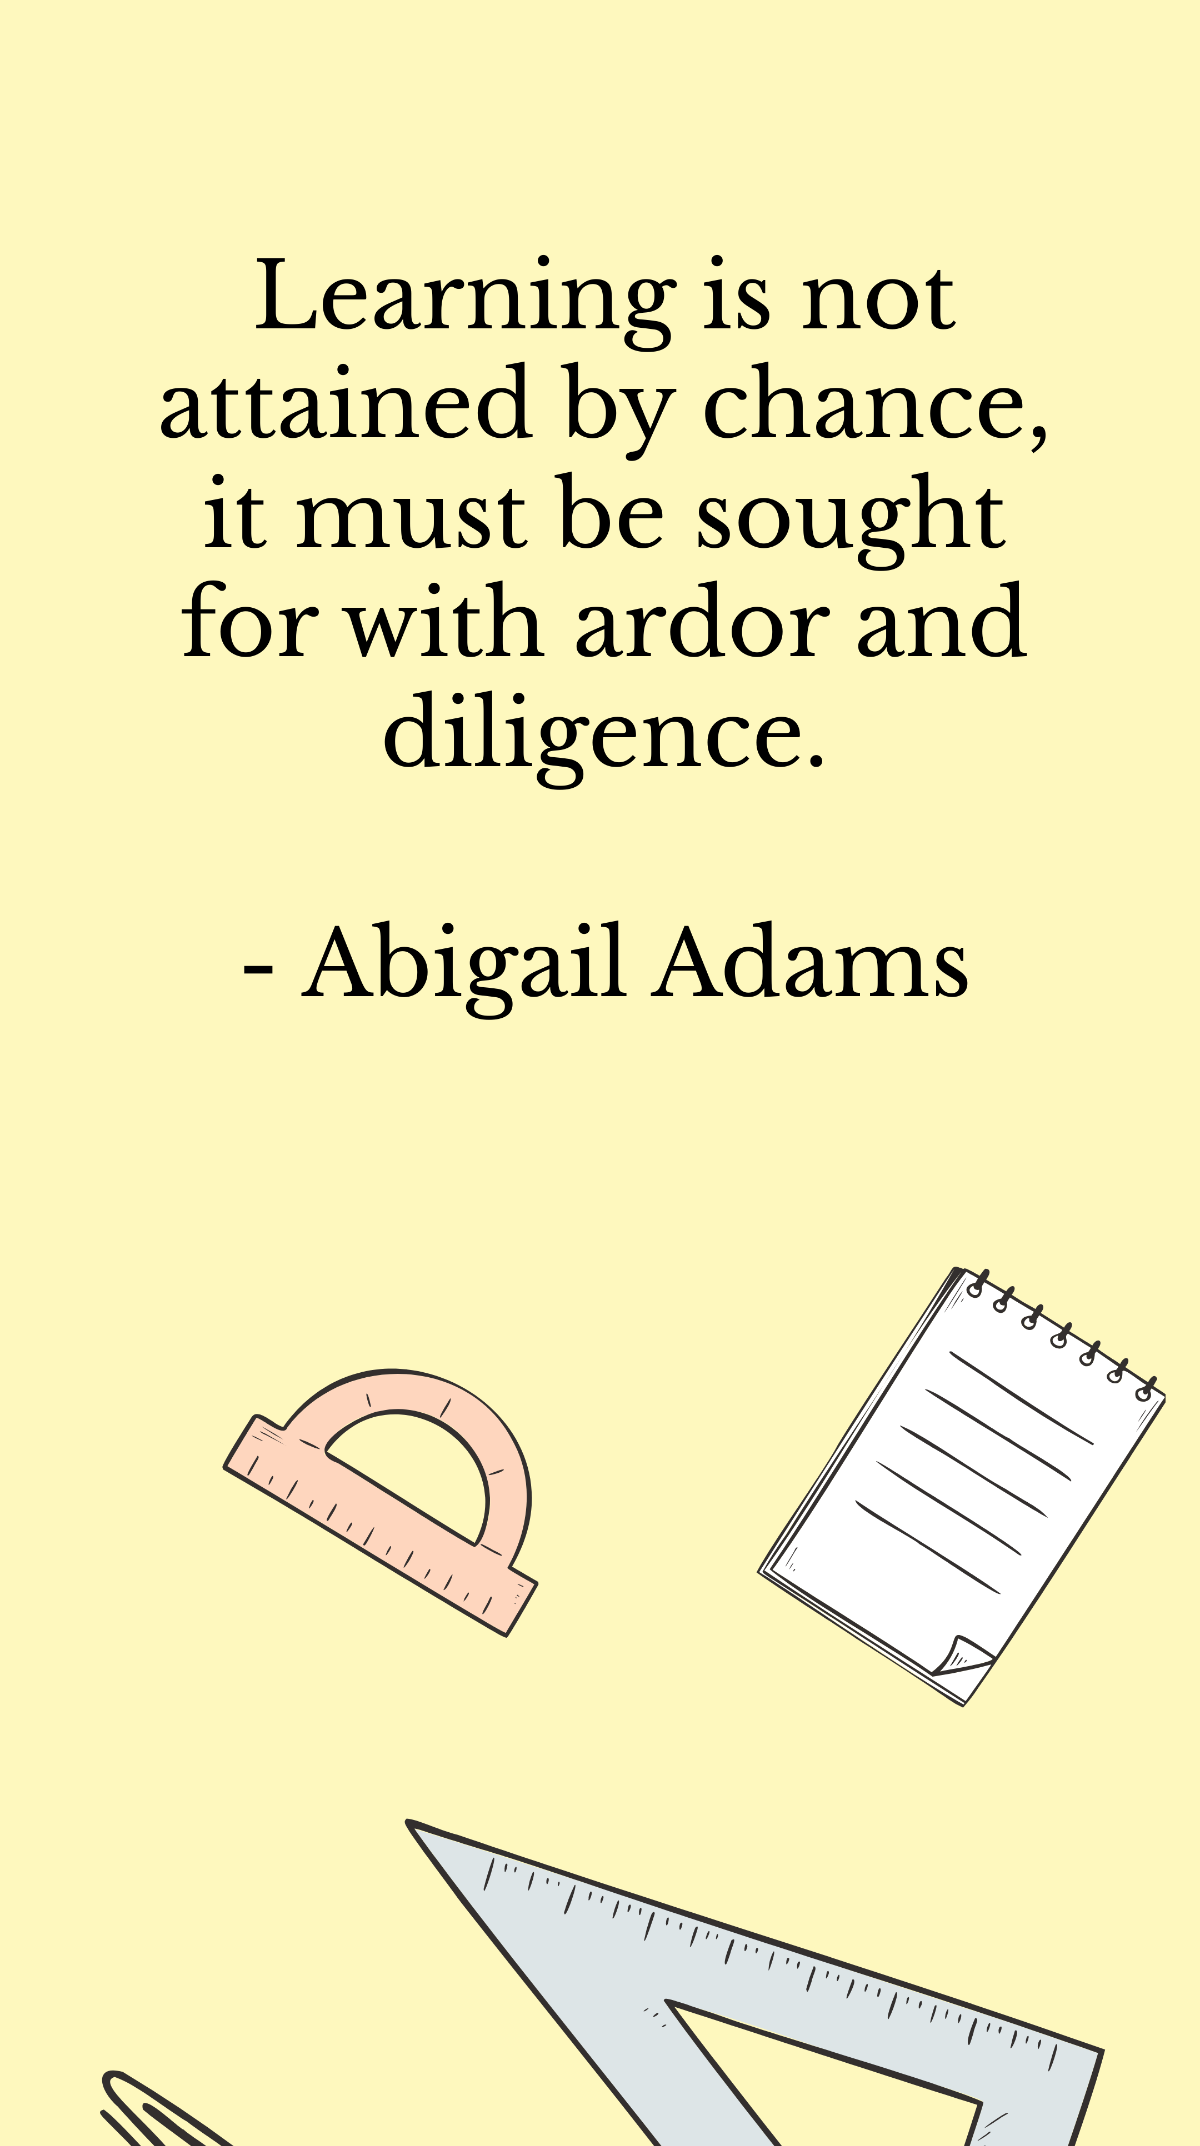 Free Abigail Adams - Learning is not attained by chance, it must be sought for with ardor and diligence. Template